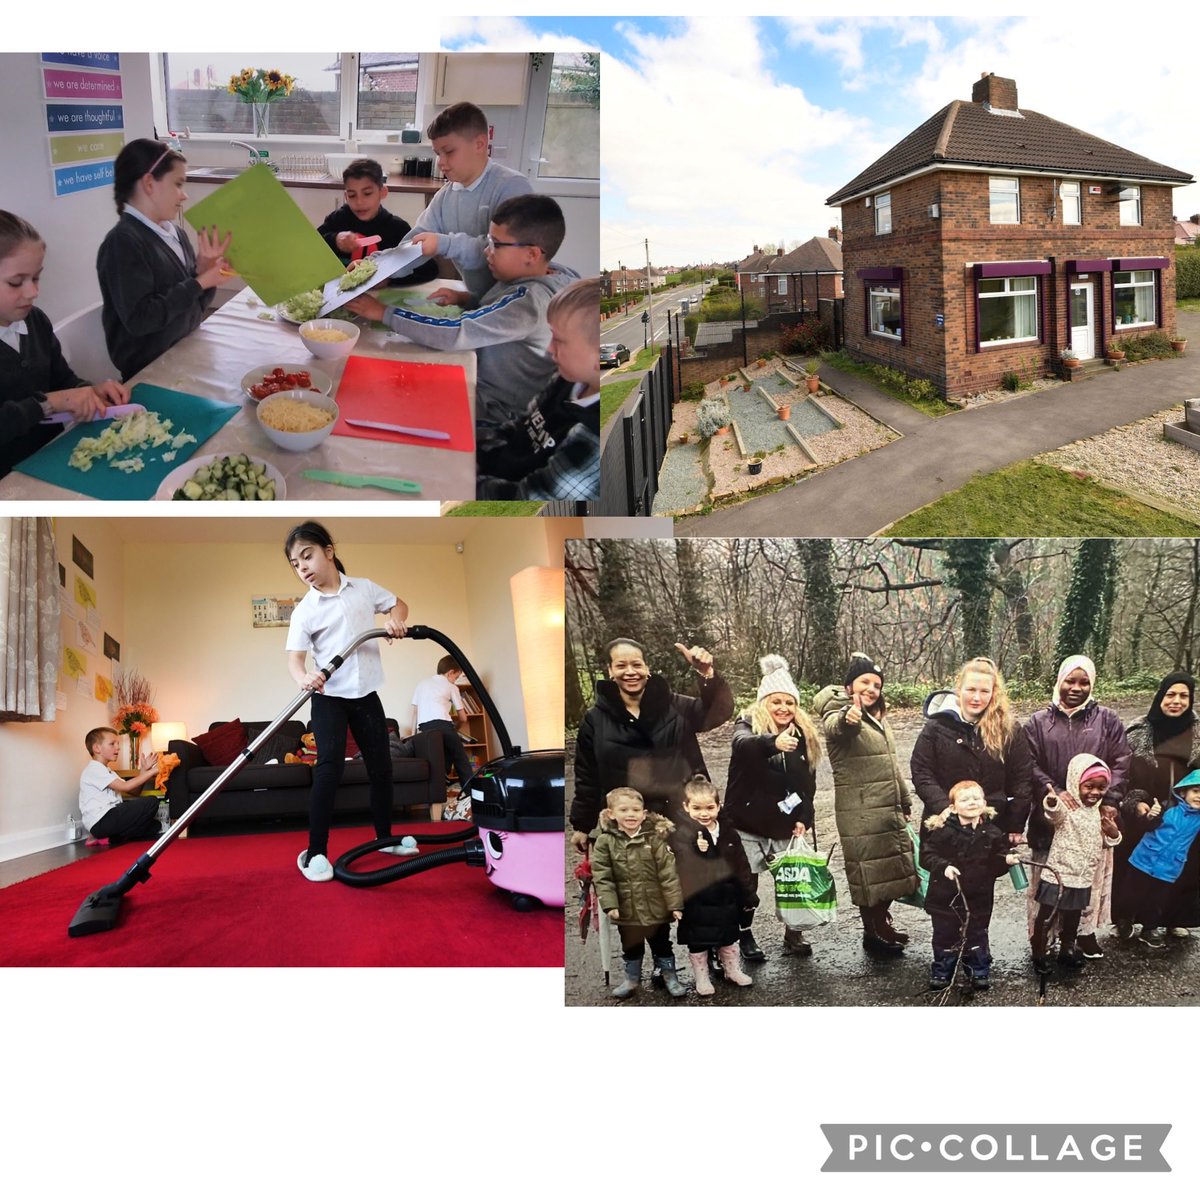 Red Robin House is ⁦@ArbourthorneCPS⁩ on site life skills house where we grow & cook food from scratch, learn skills we need for life, welcome parents & children to share a love of learning and develop intergenerational joy! Come & visit soon! #MoreThanASchool #CommunityHub